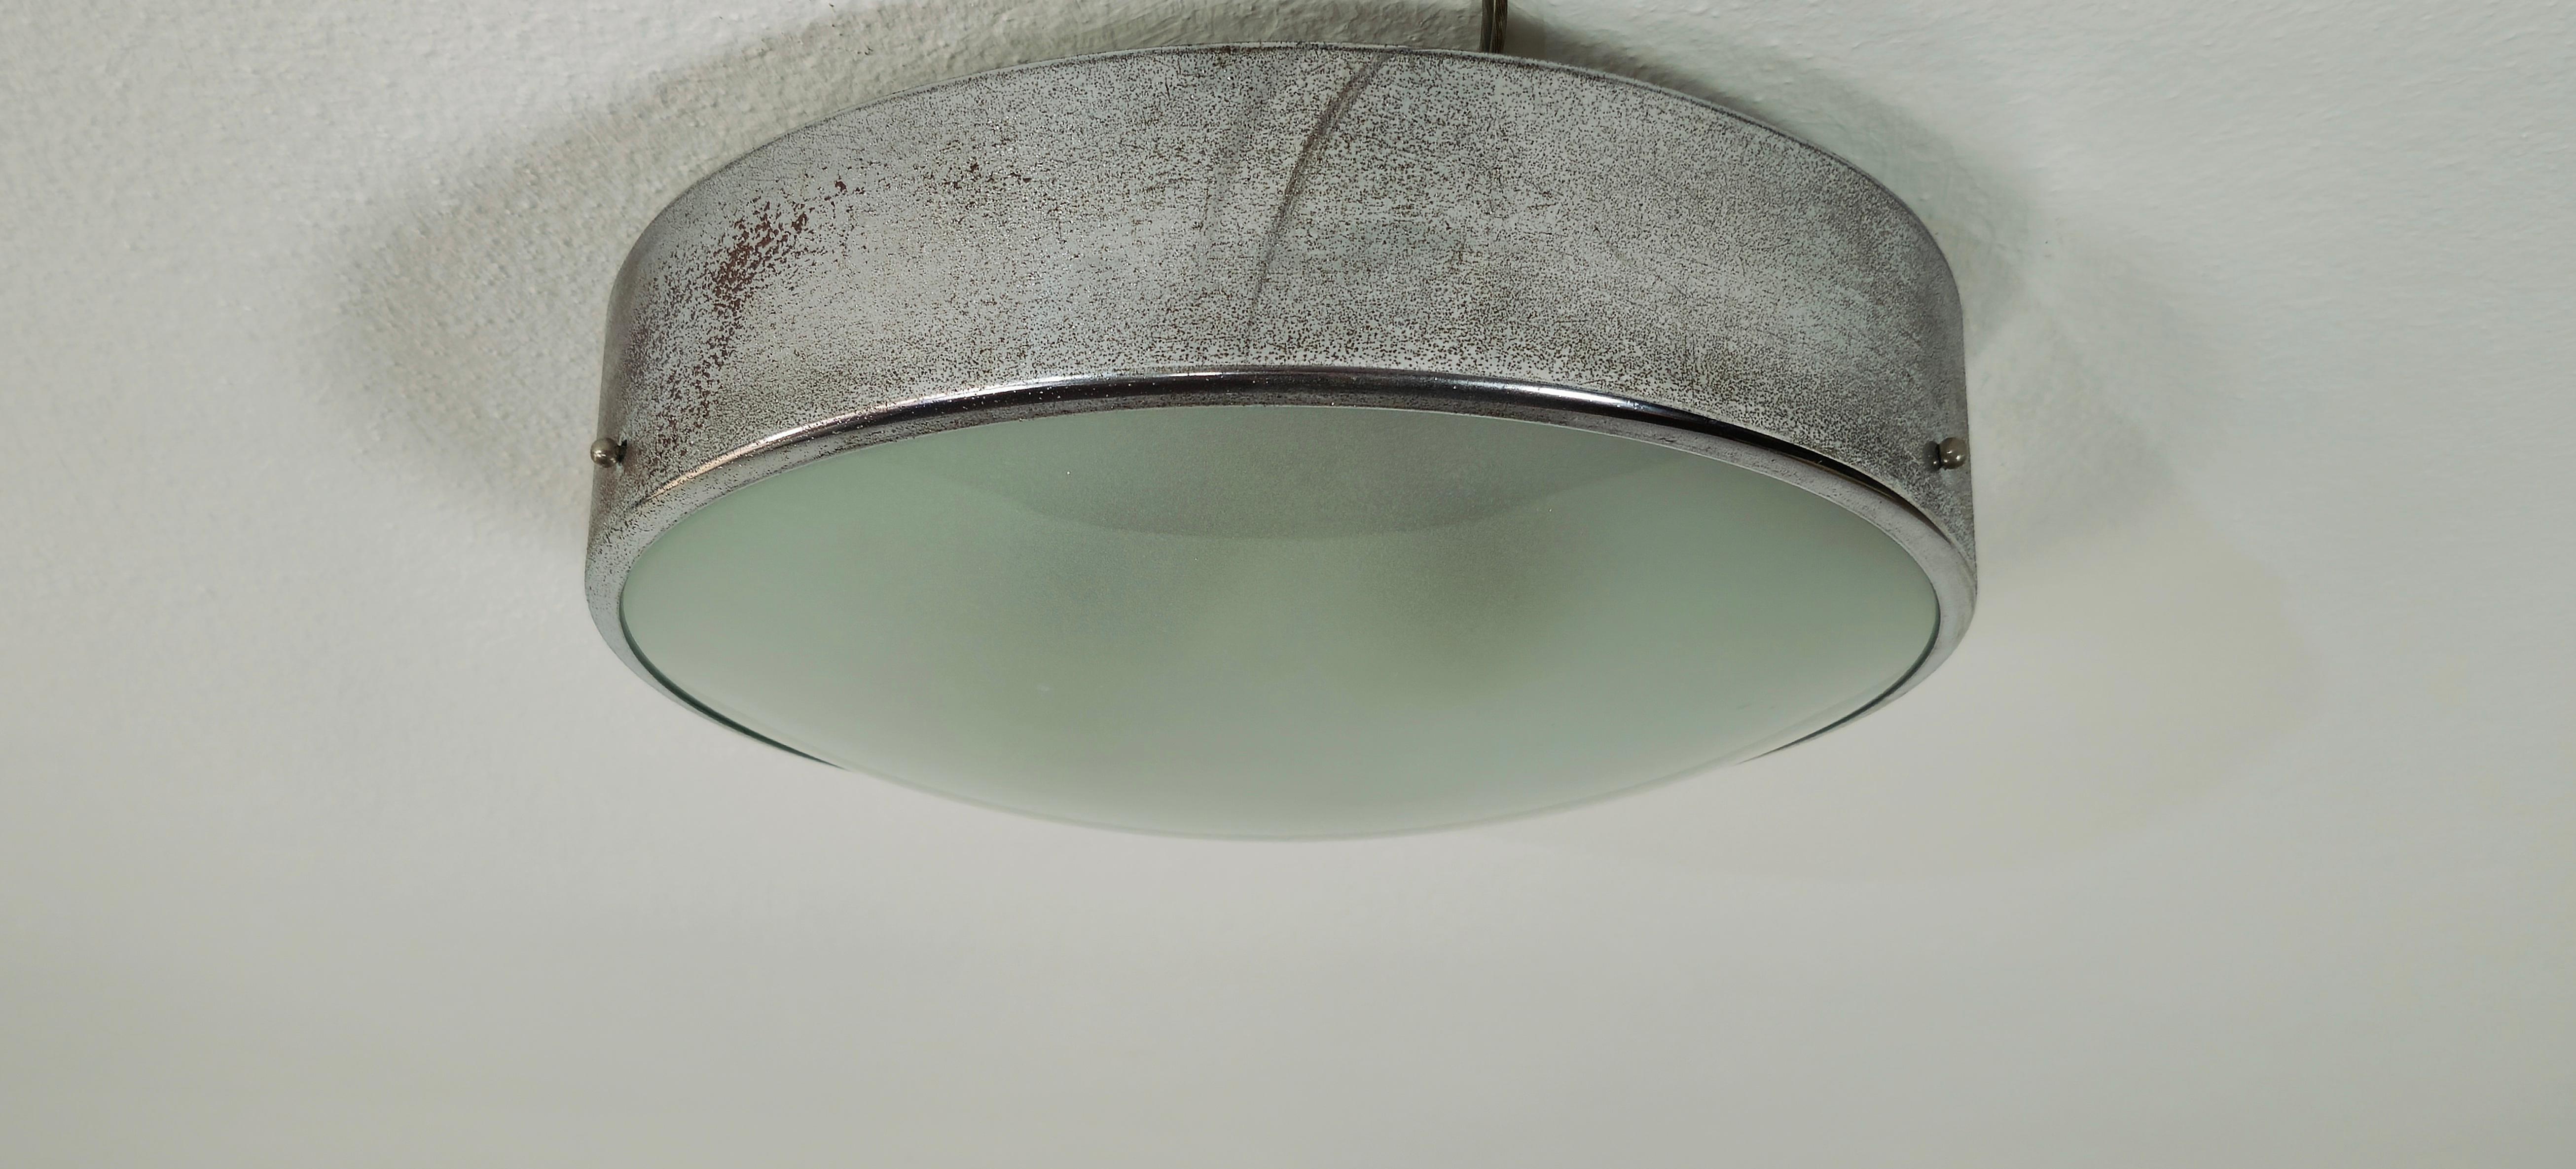 Mid-Century Modern Flush Mount Wall Light Glass Metal In the Style of Fontana Arte Midcentury 1960s For Sale